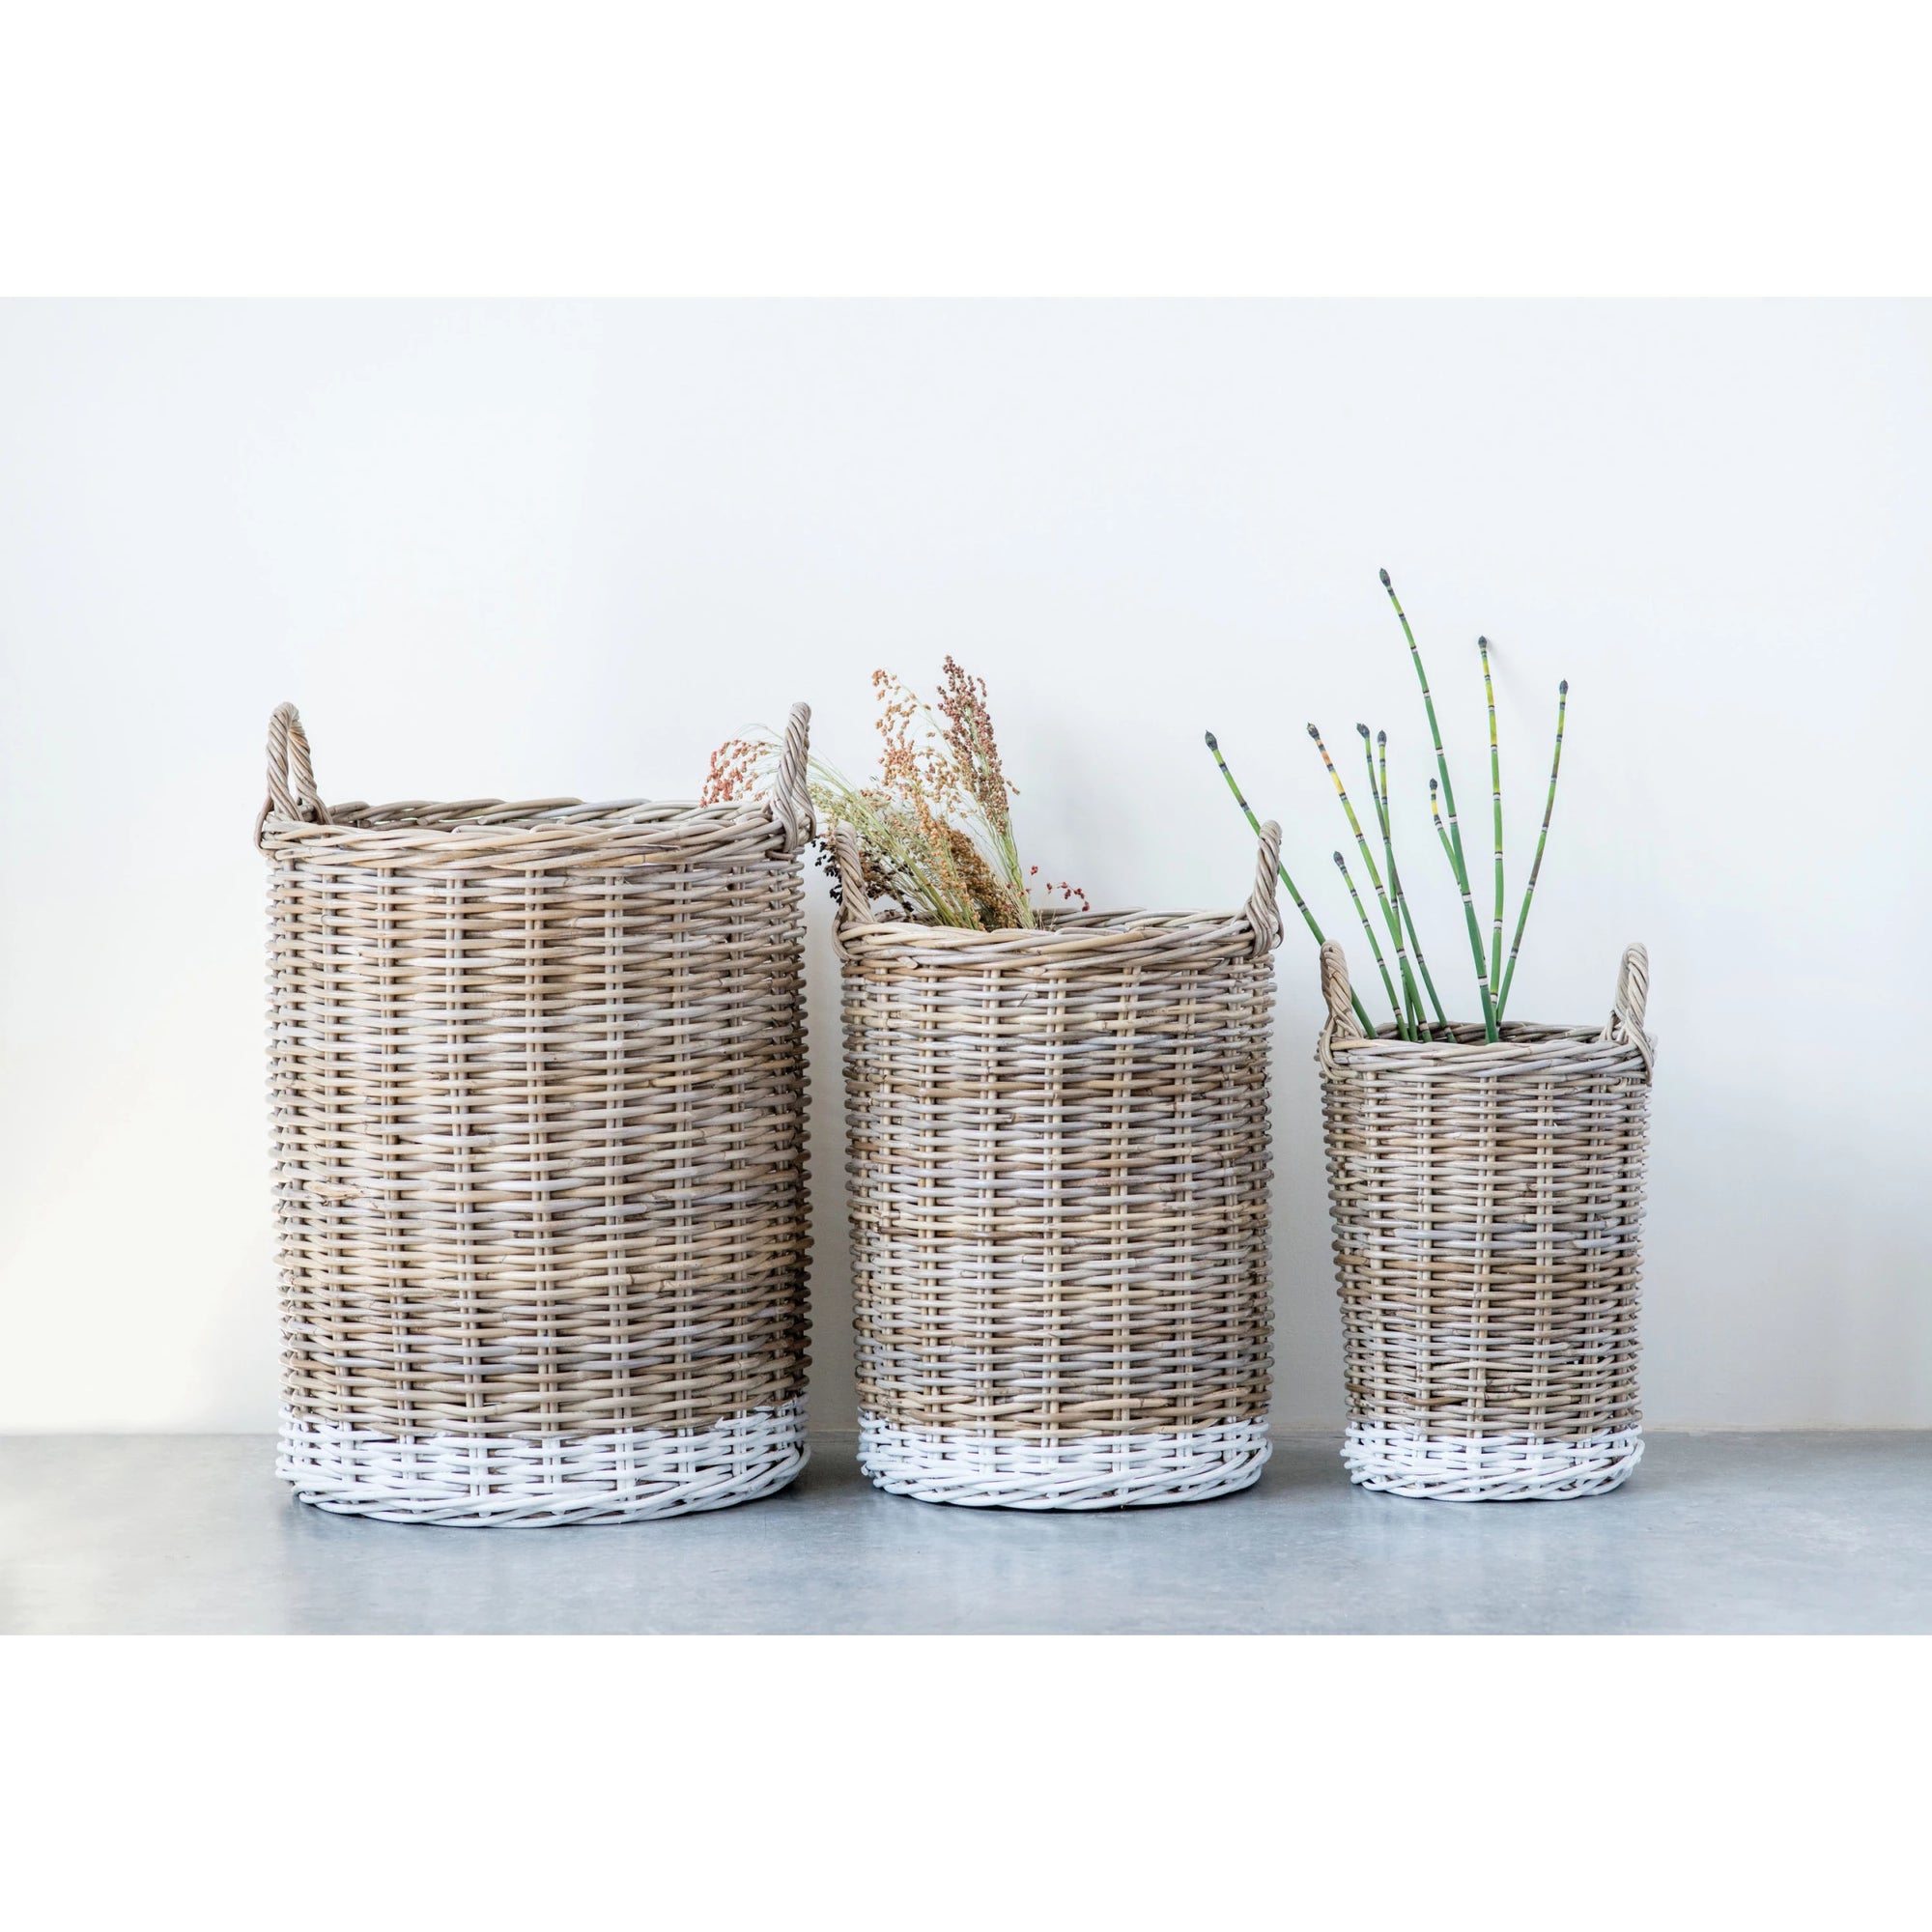 Coordinating set of Rattan baskets with handles. Natural in color and hand made artisan goods. Can be used for faux stem decor. Blanket storage. Kids toys storage. Home Decor. 